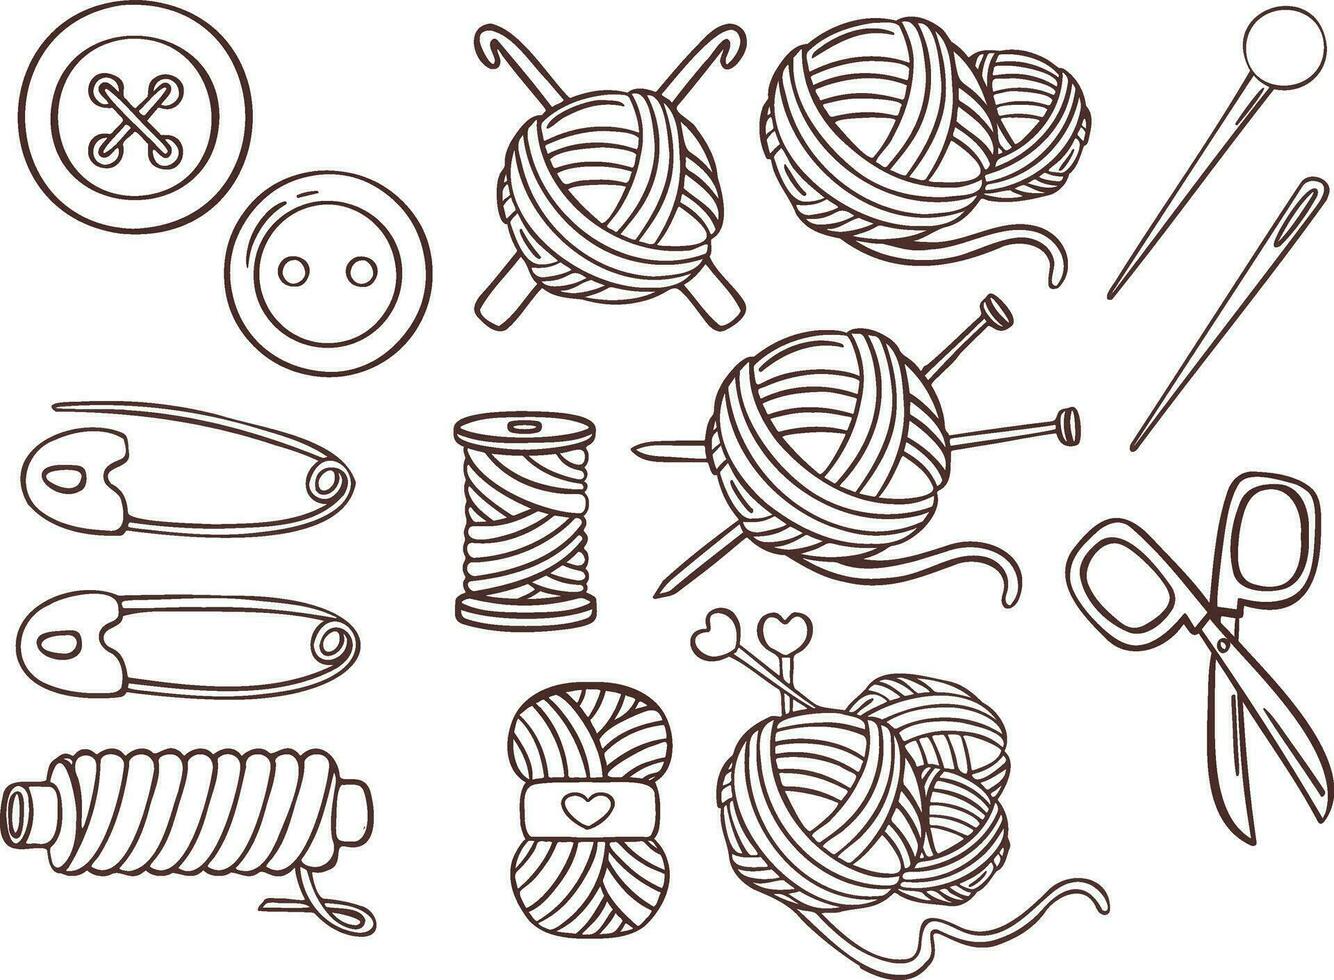 Knitting sewing symbols set needlework vector made by hands